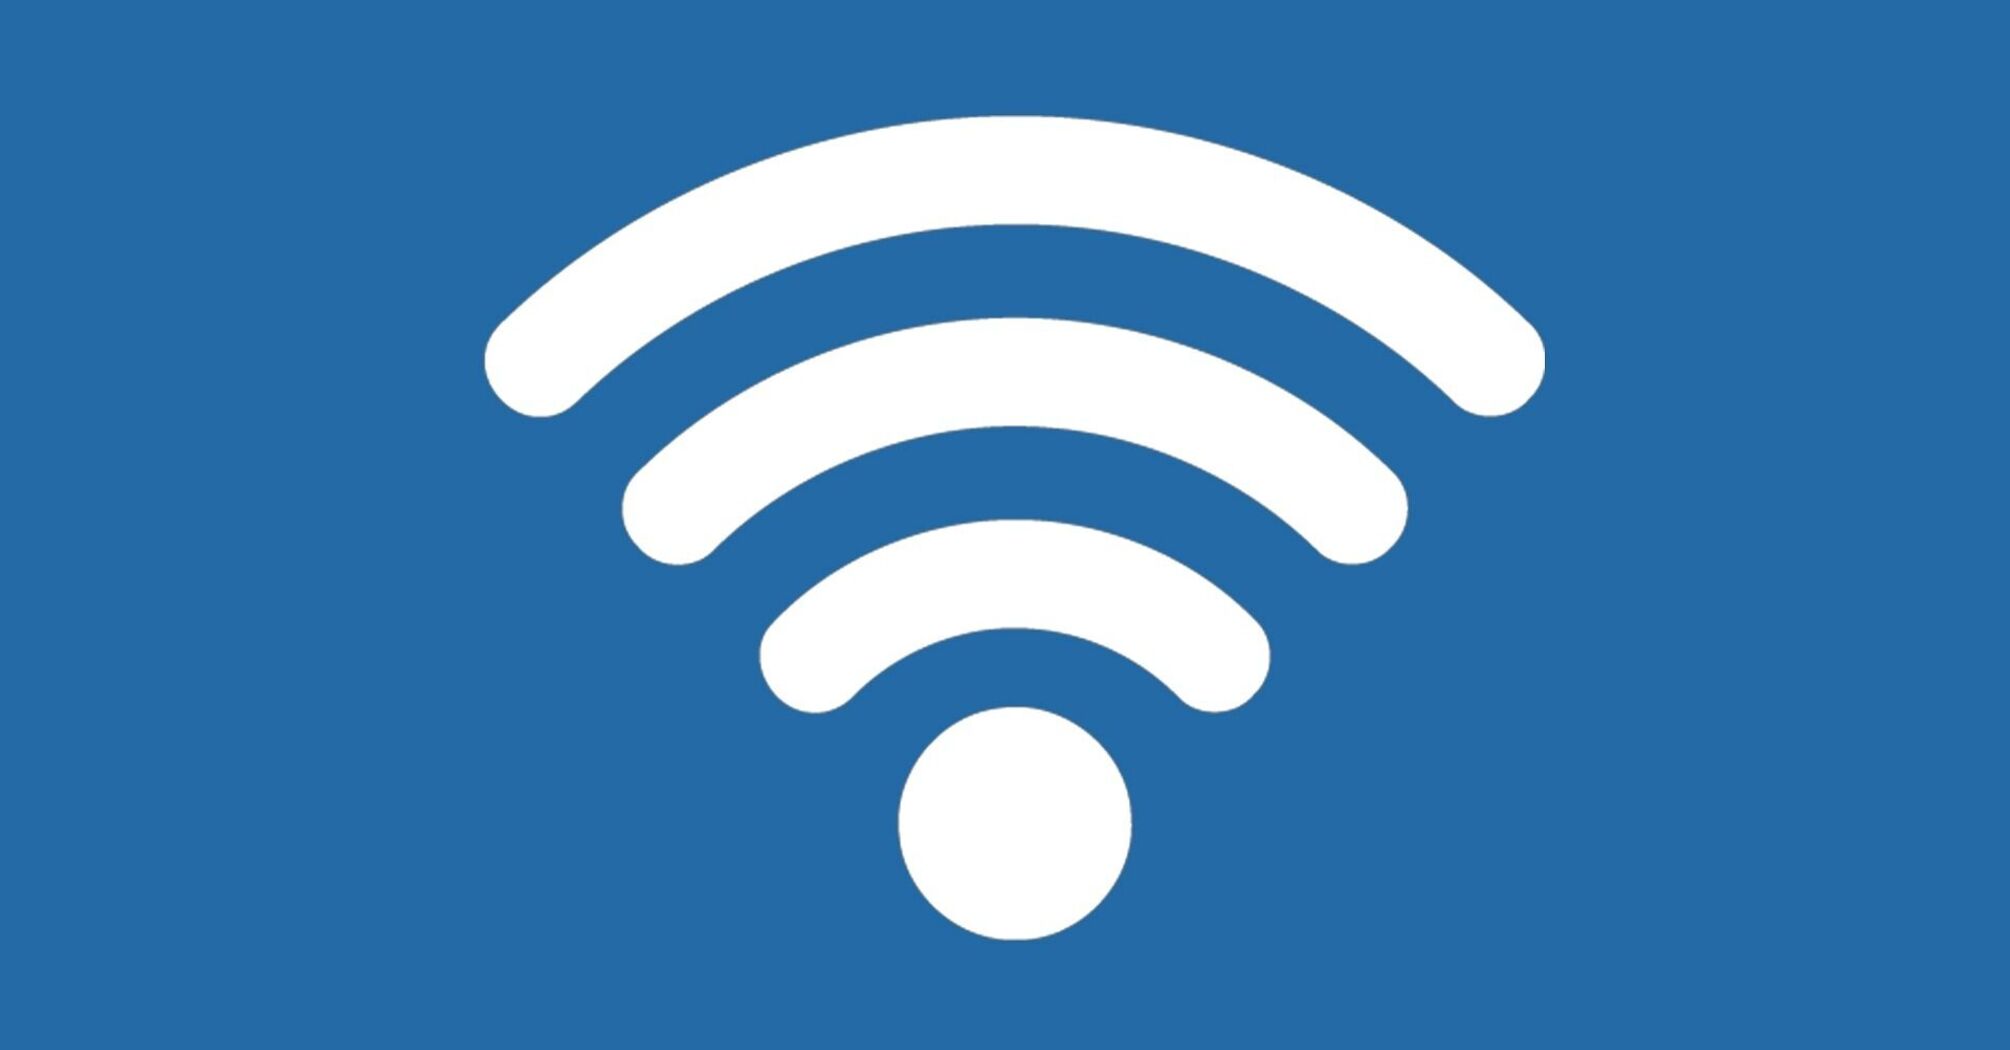 Iconic white Wi-Fi symbol centered on a solid blue background